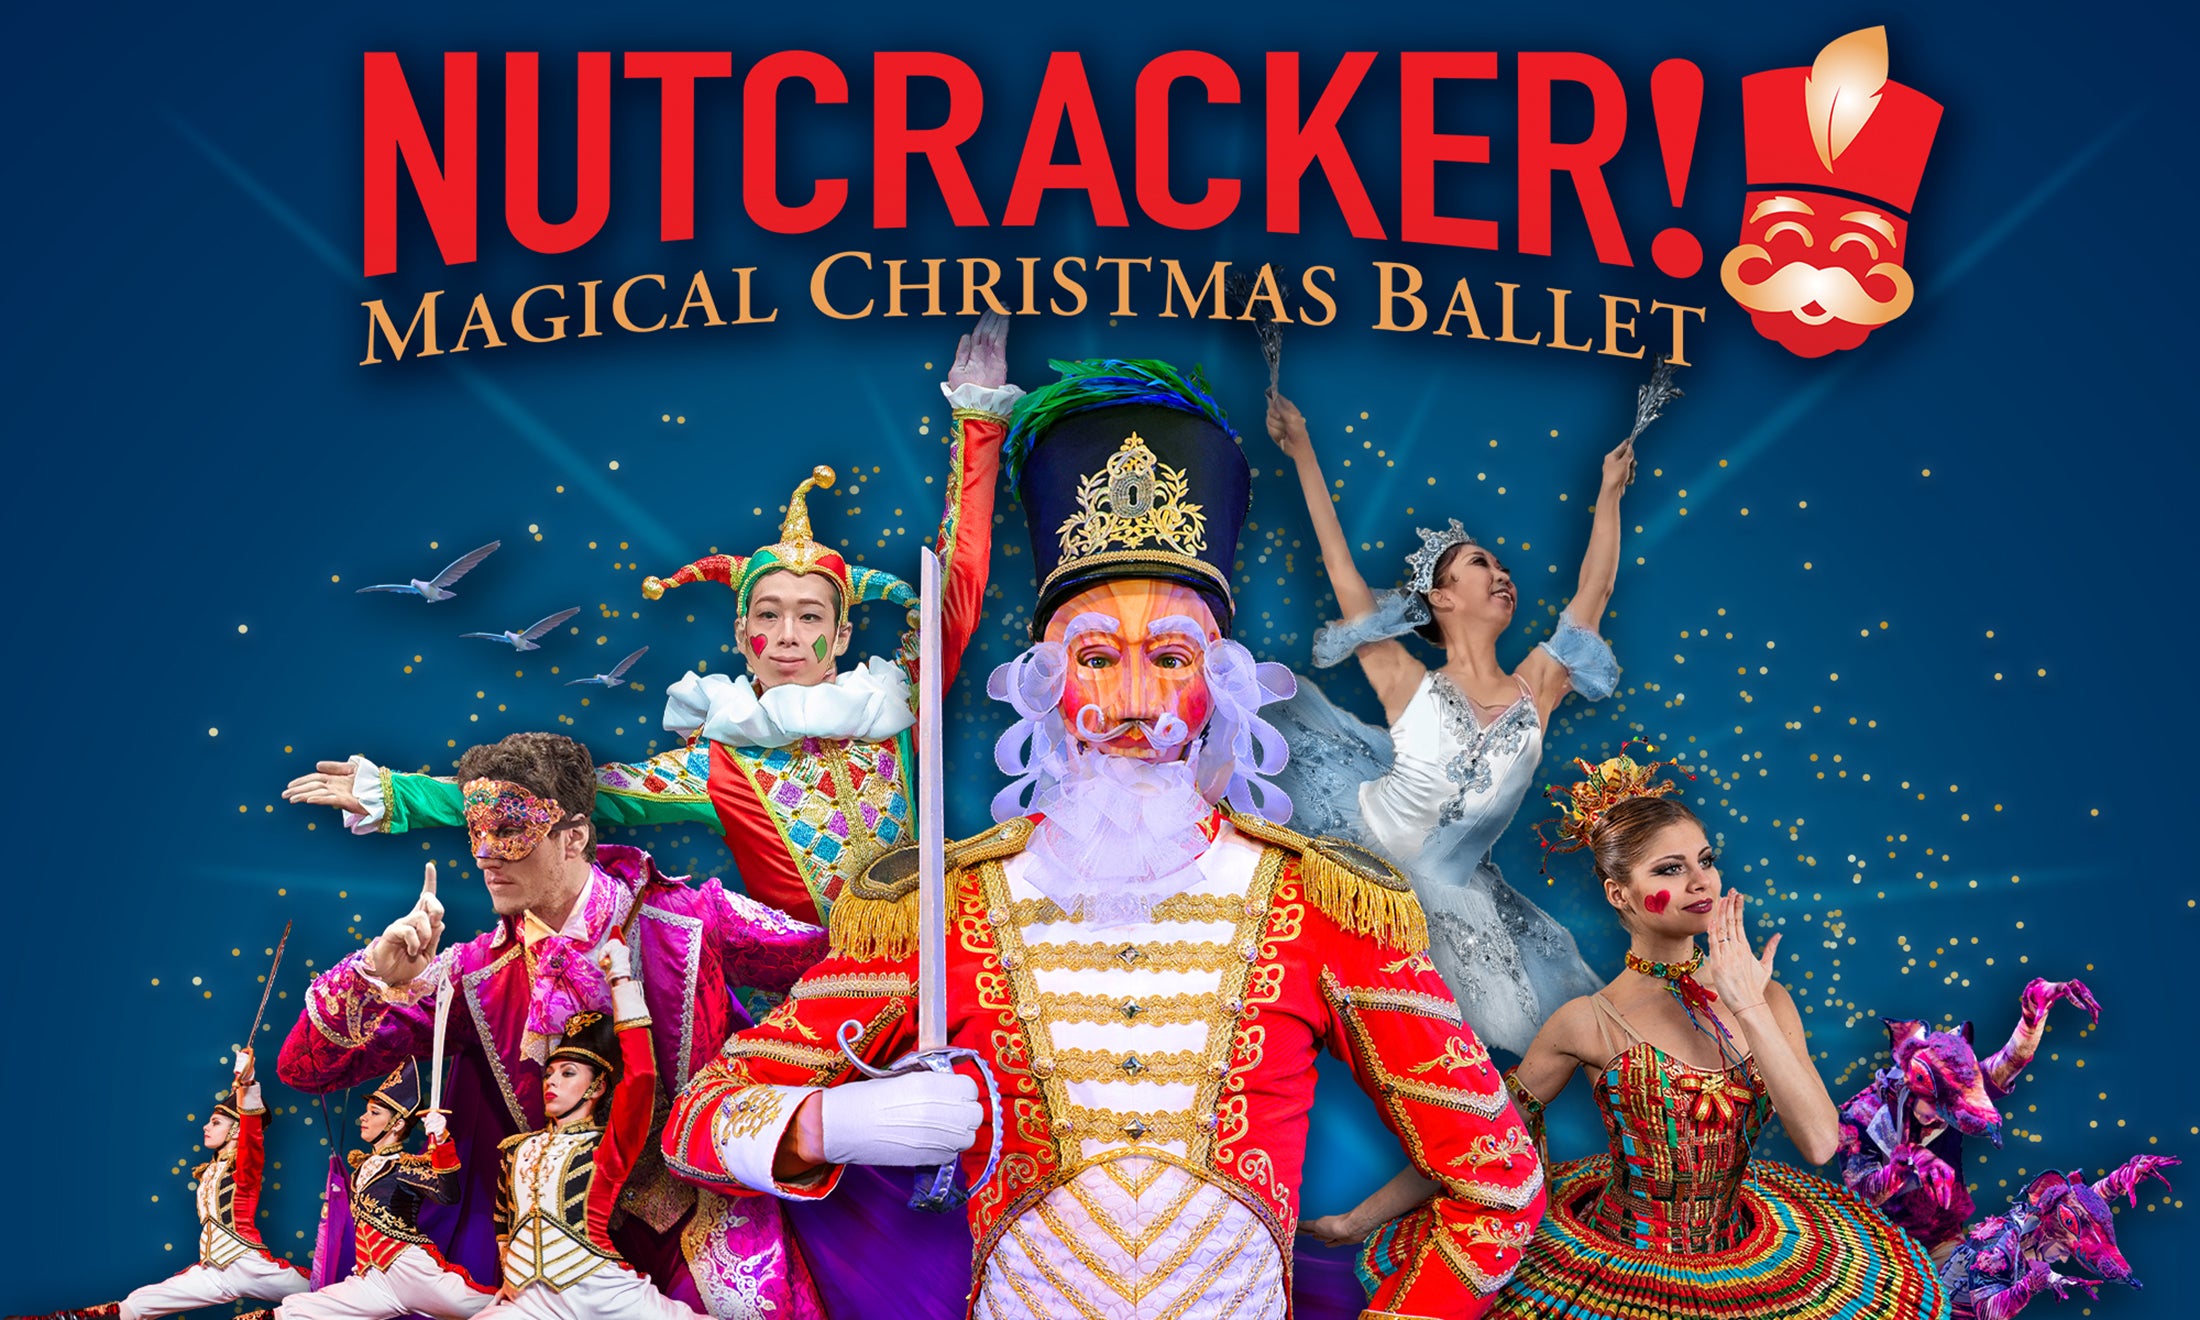 Nutcracker! Magical Christmas Ballet pre-sale password for your tickets in Durham